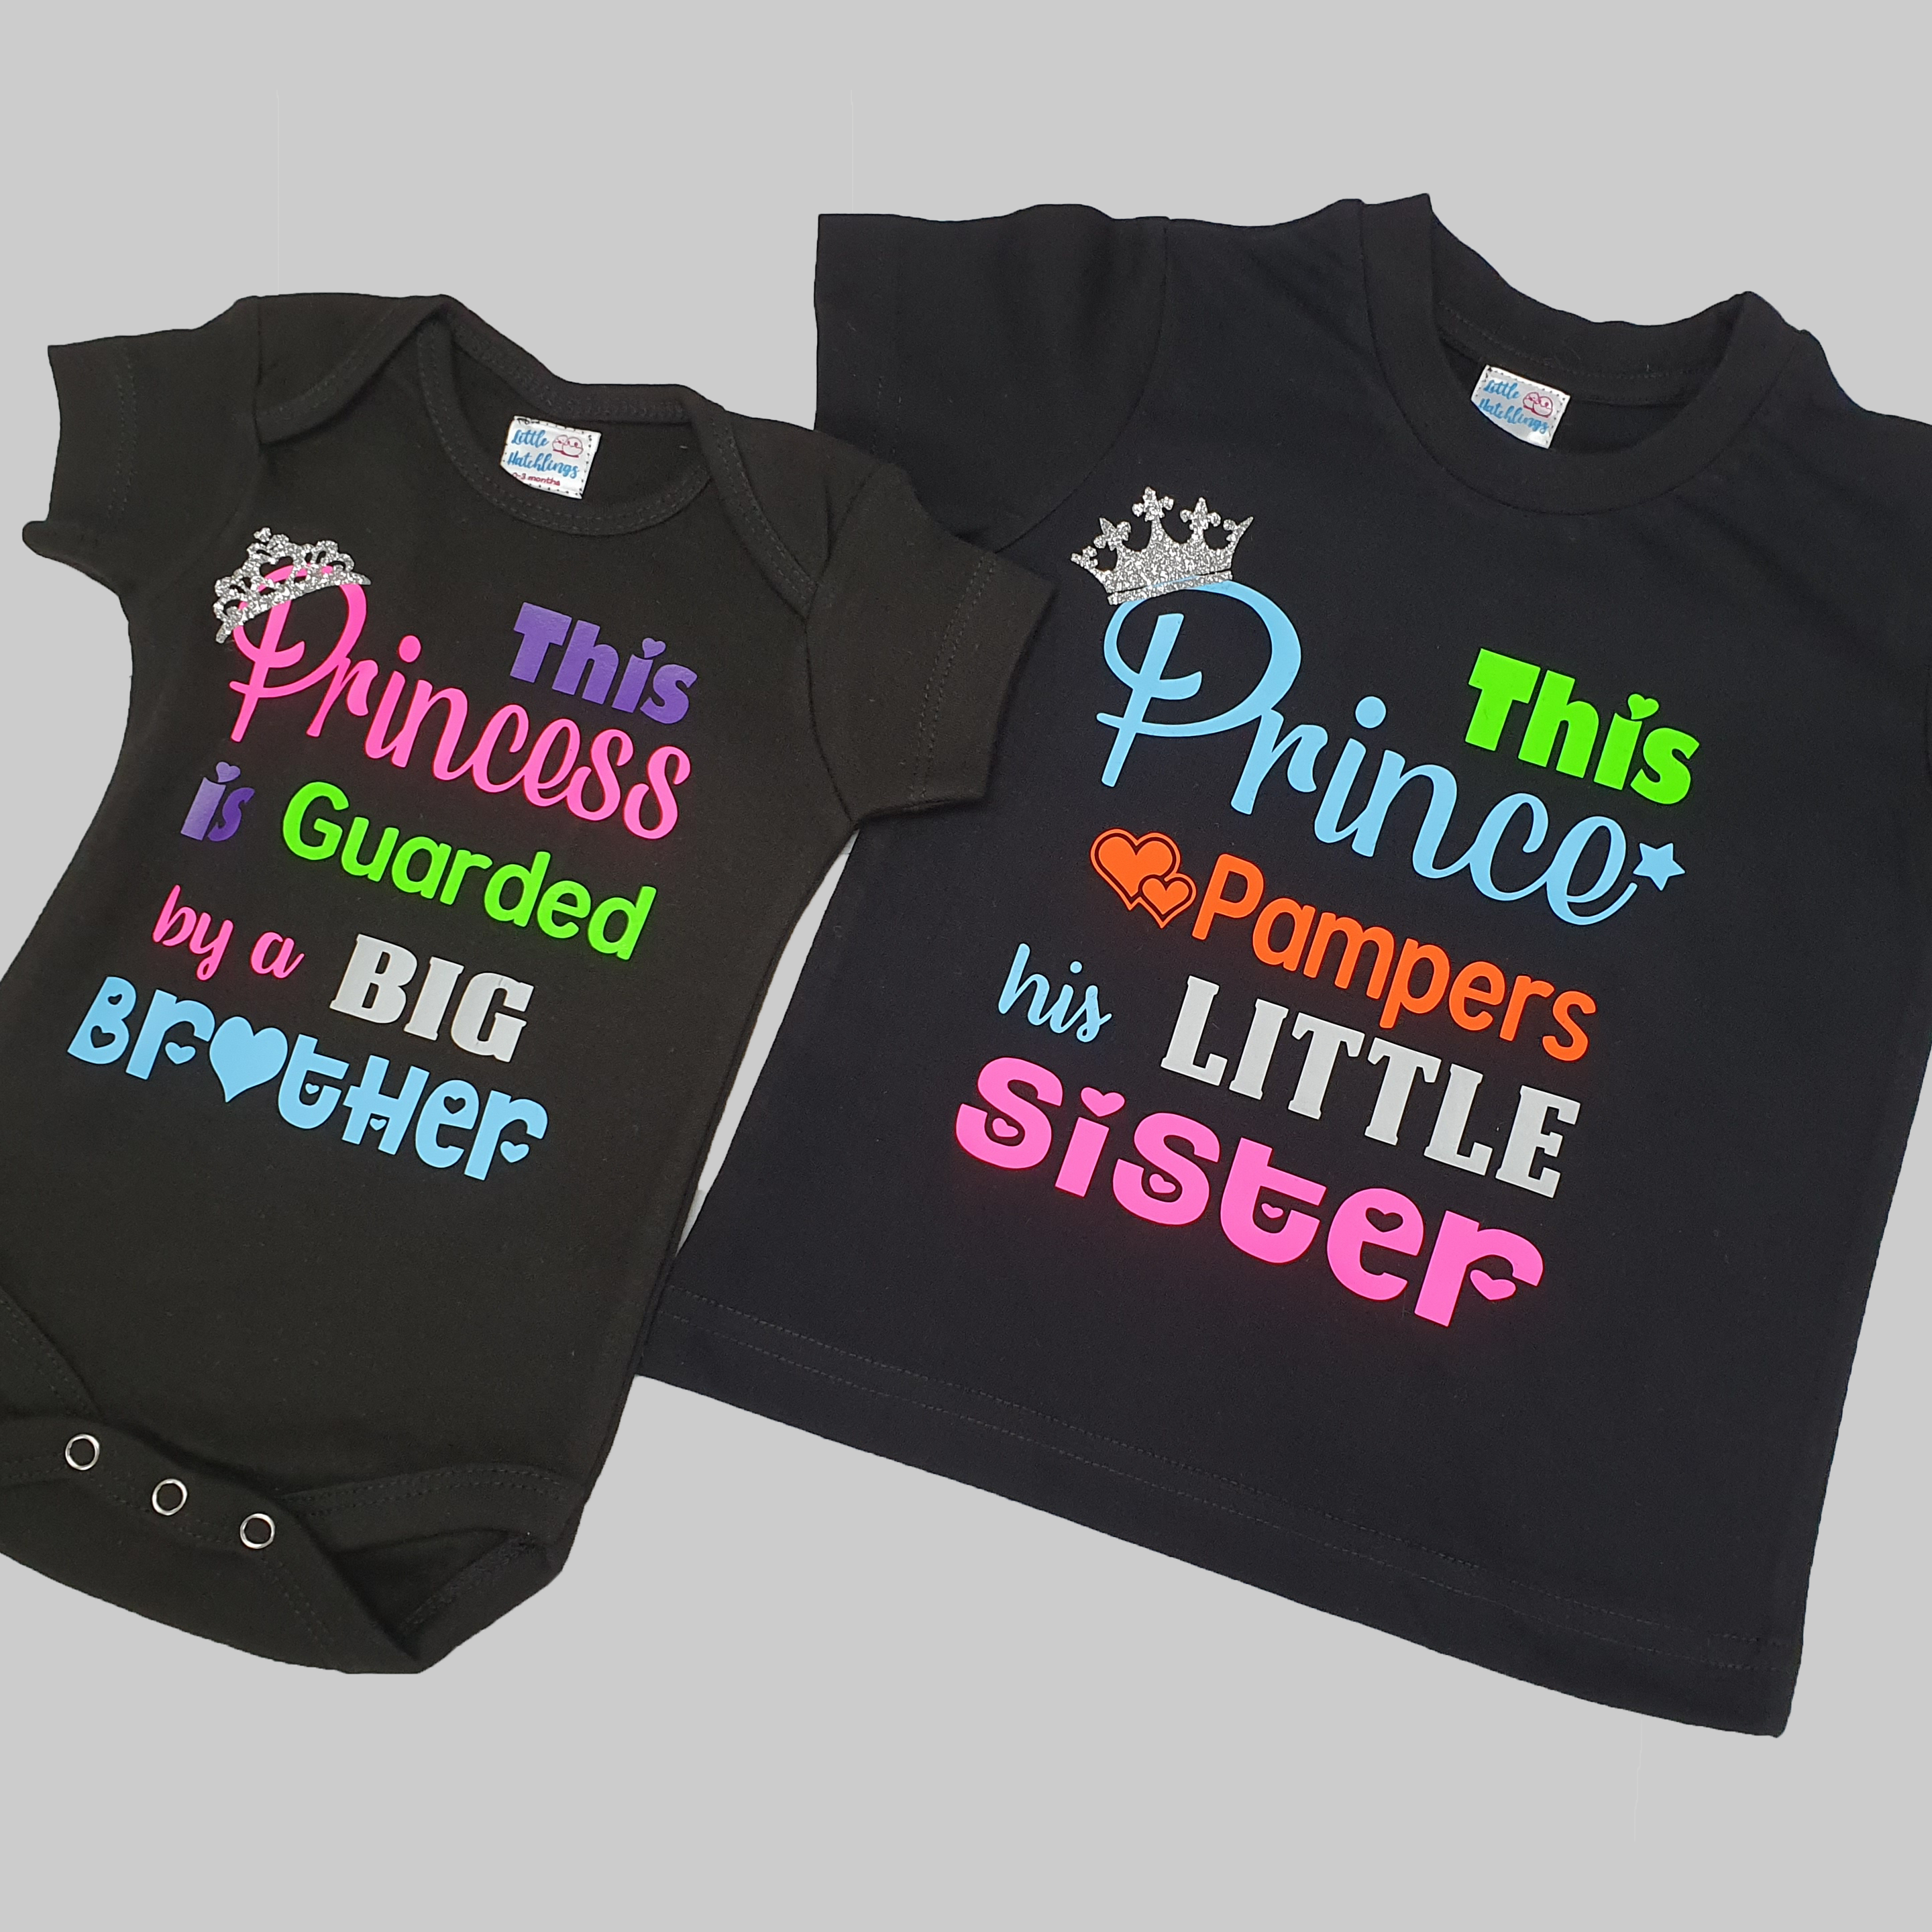 Prince Pampers Lil Sis + Princess Guarded by Big Bro Black Onesie Tshirt Combo